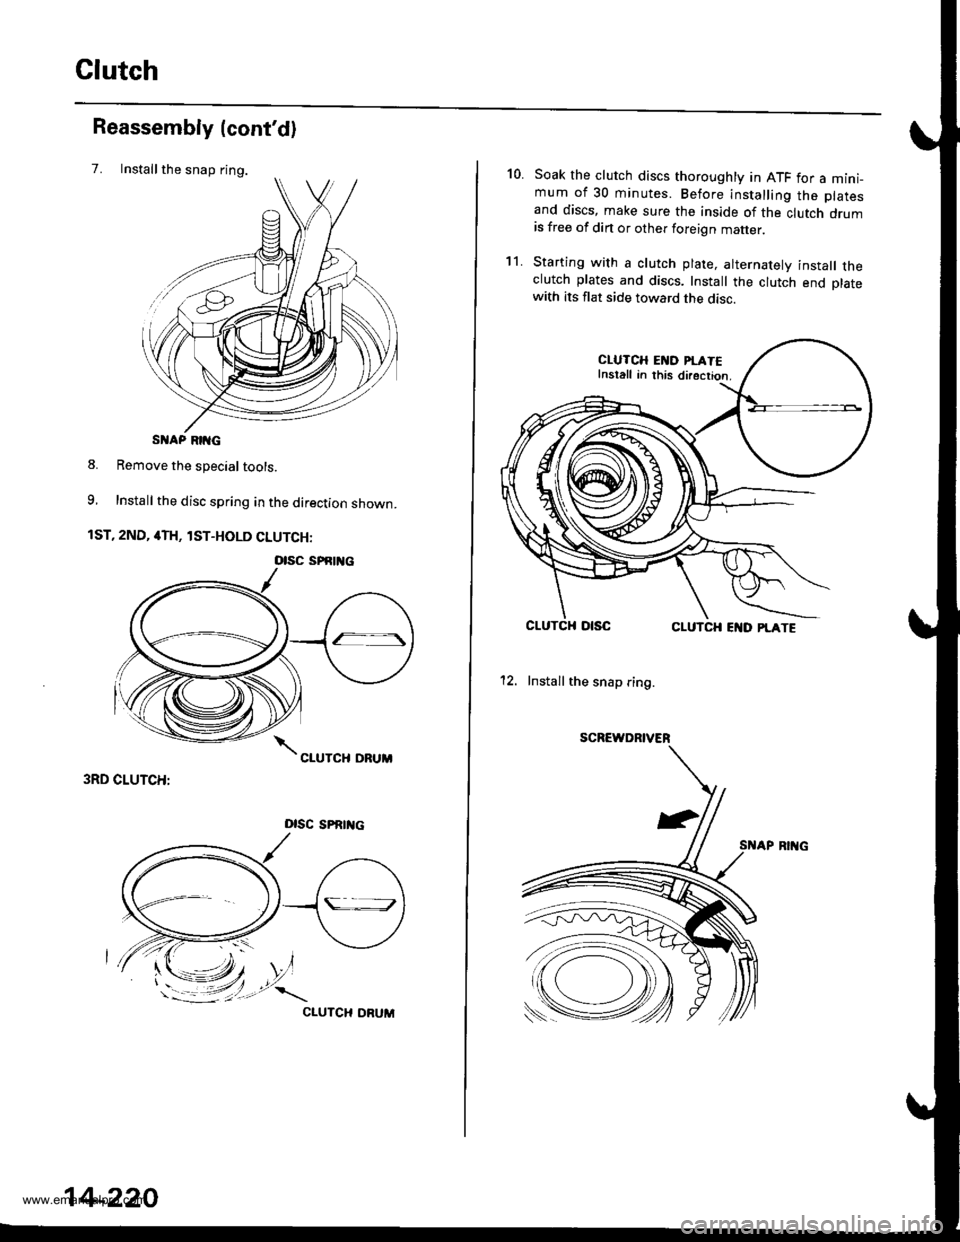 HONDA CR-V 1998 RD1-RD3 / 1.G Owners Manual 
Clutch
Installthe snap ring.
Reassembly (contd)
7.
S AP RIIG
8. Remove the special tools.
9, Install the disc spring in the direction shown.
1ST, 2ND, 4TH, lST-HOLD CLUTCH:
3RD CLUTCH:
Dlsc sPRrrtc
